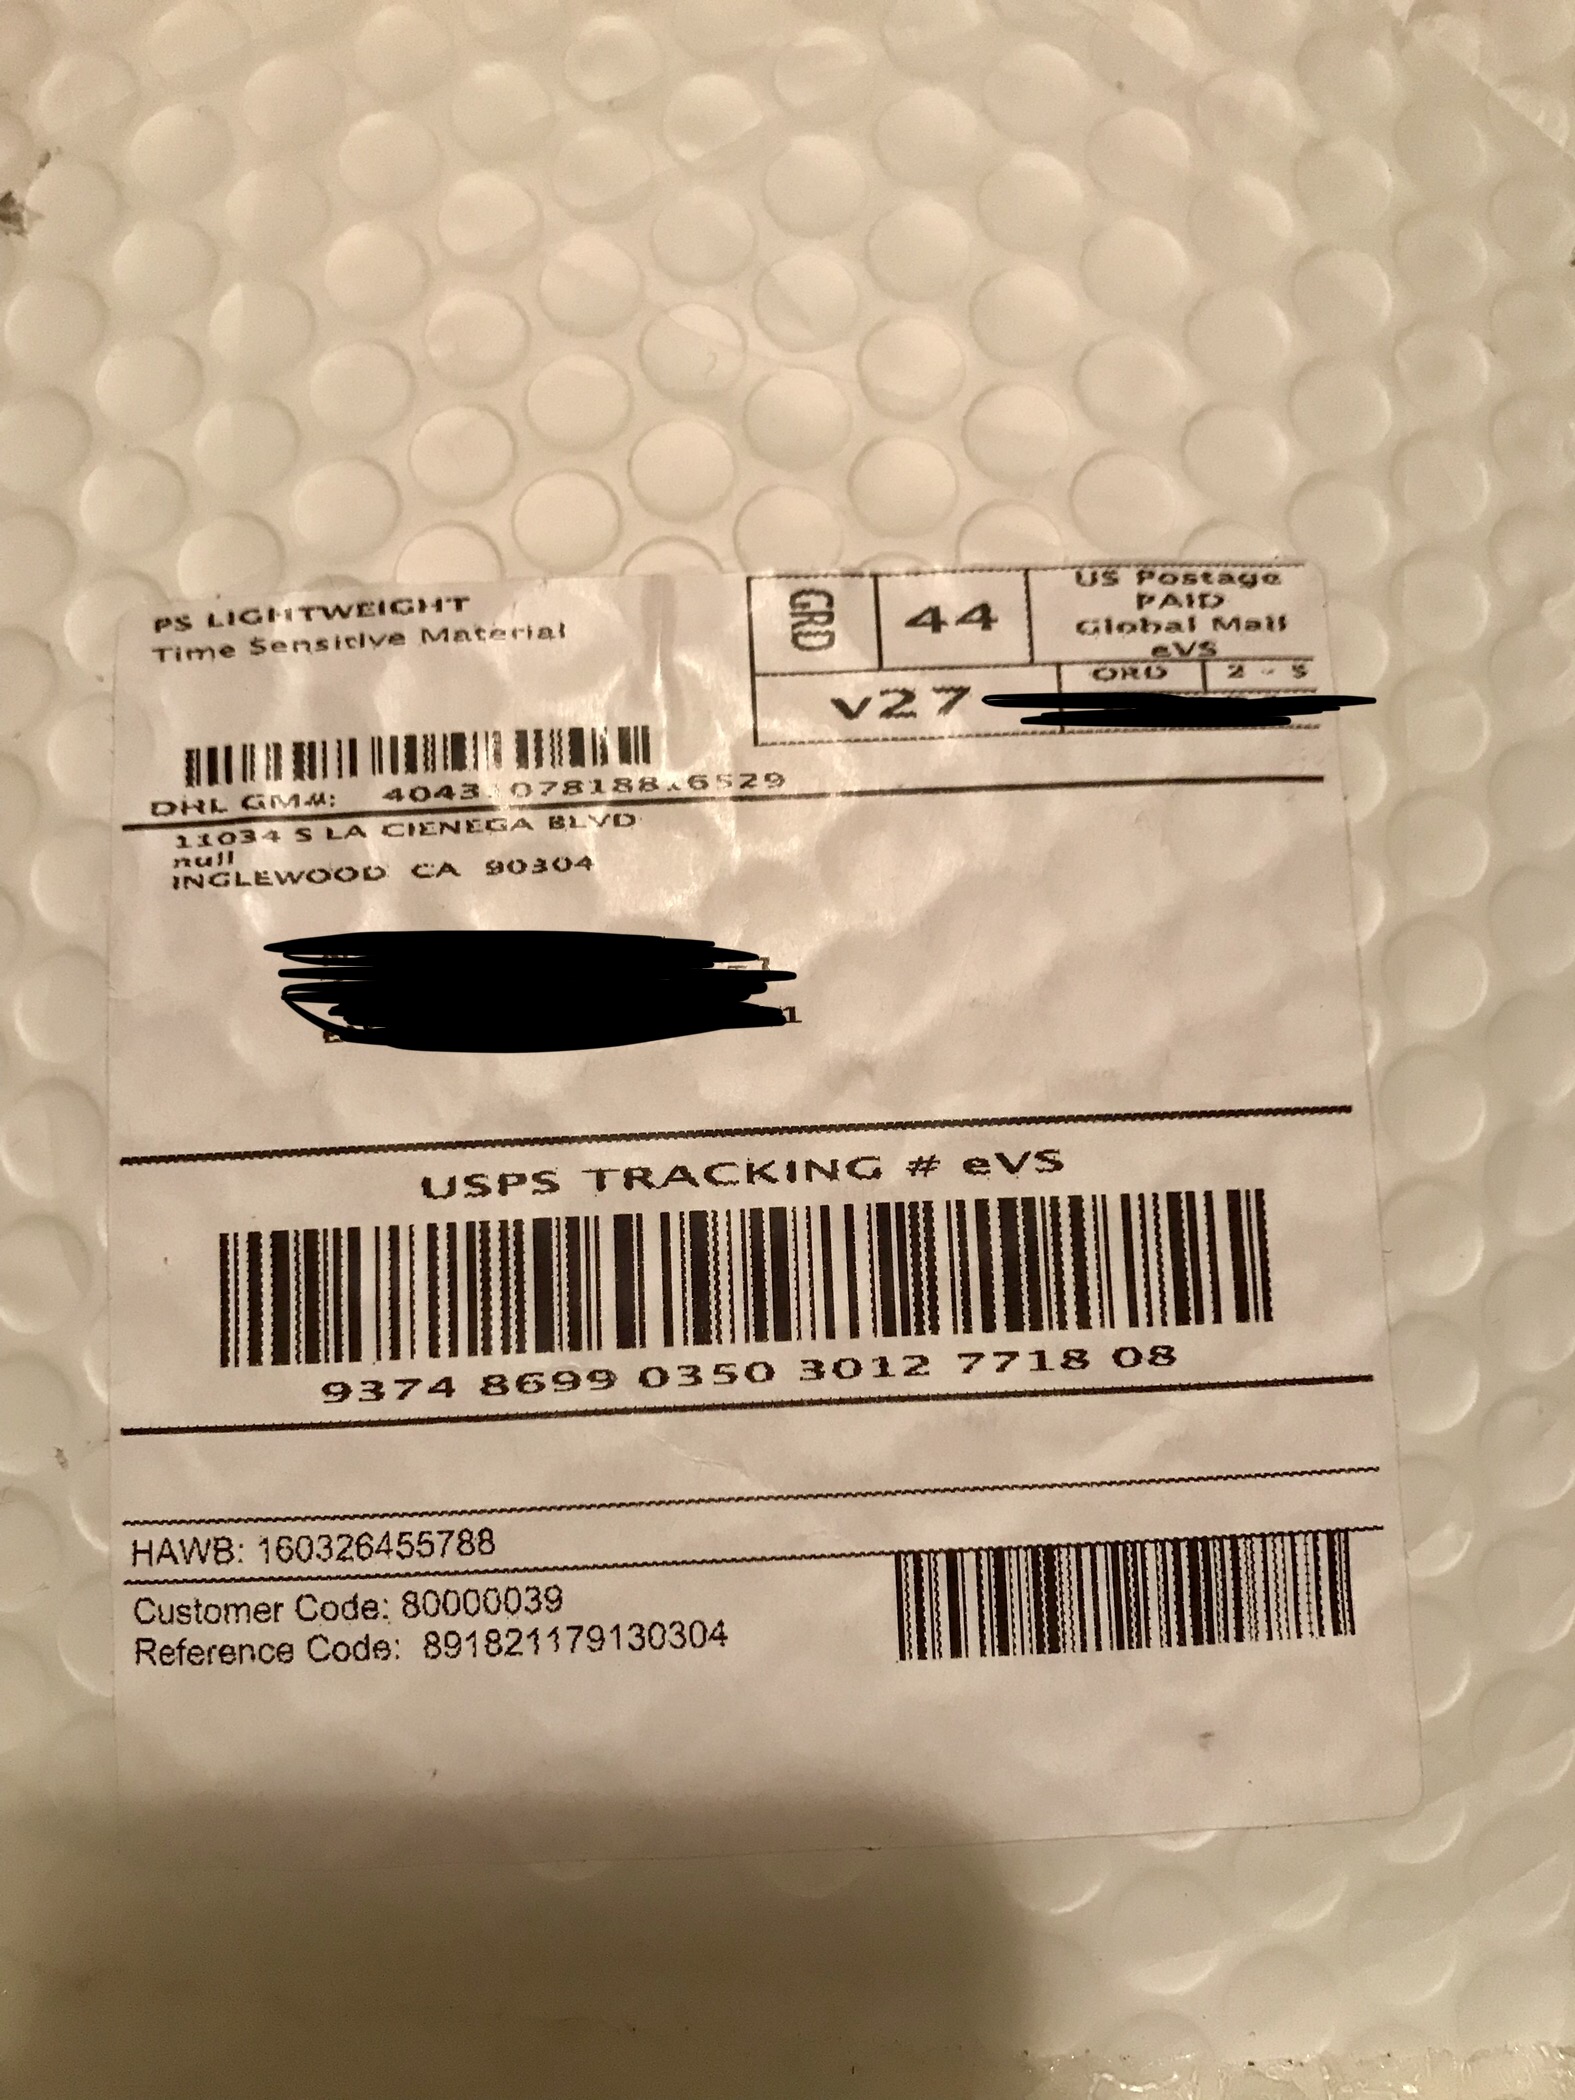 Shipping package